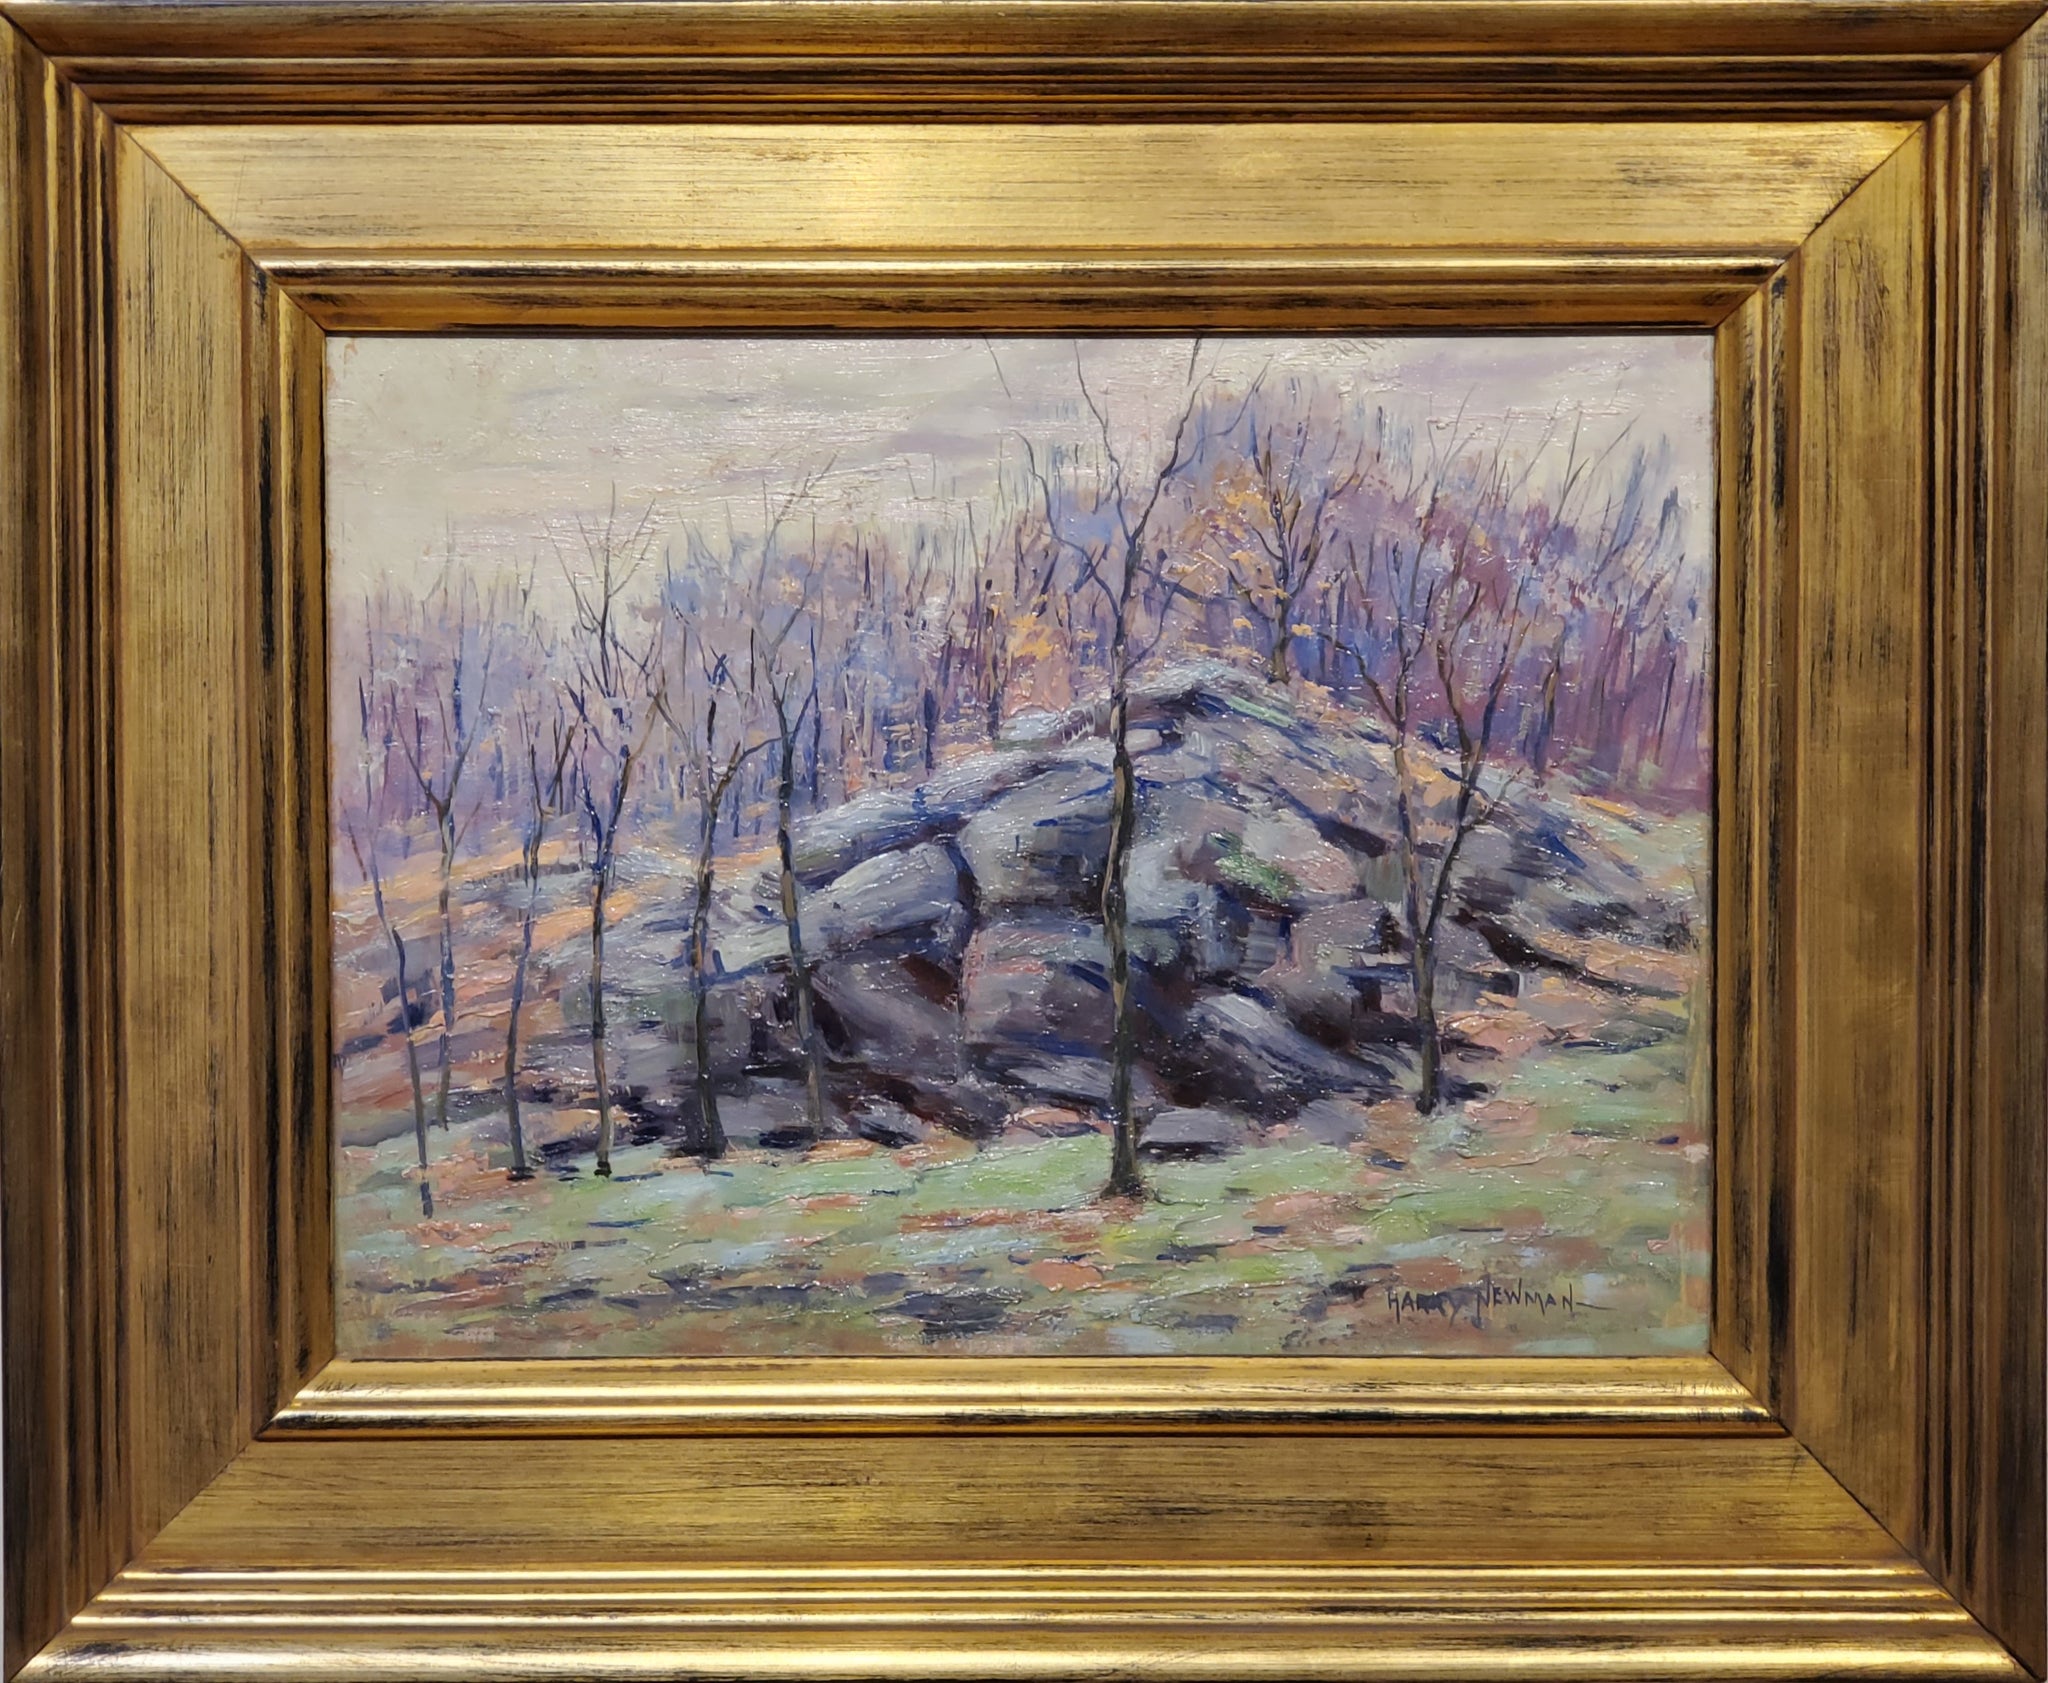 Gold Framed Impressionist Landscape Oil Painting Signed by Harry W Newman (1873-1946)